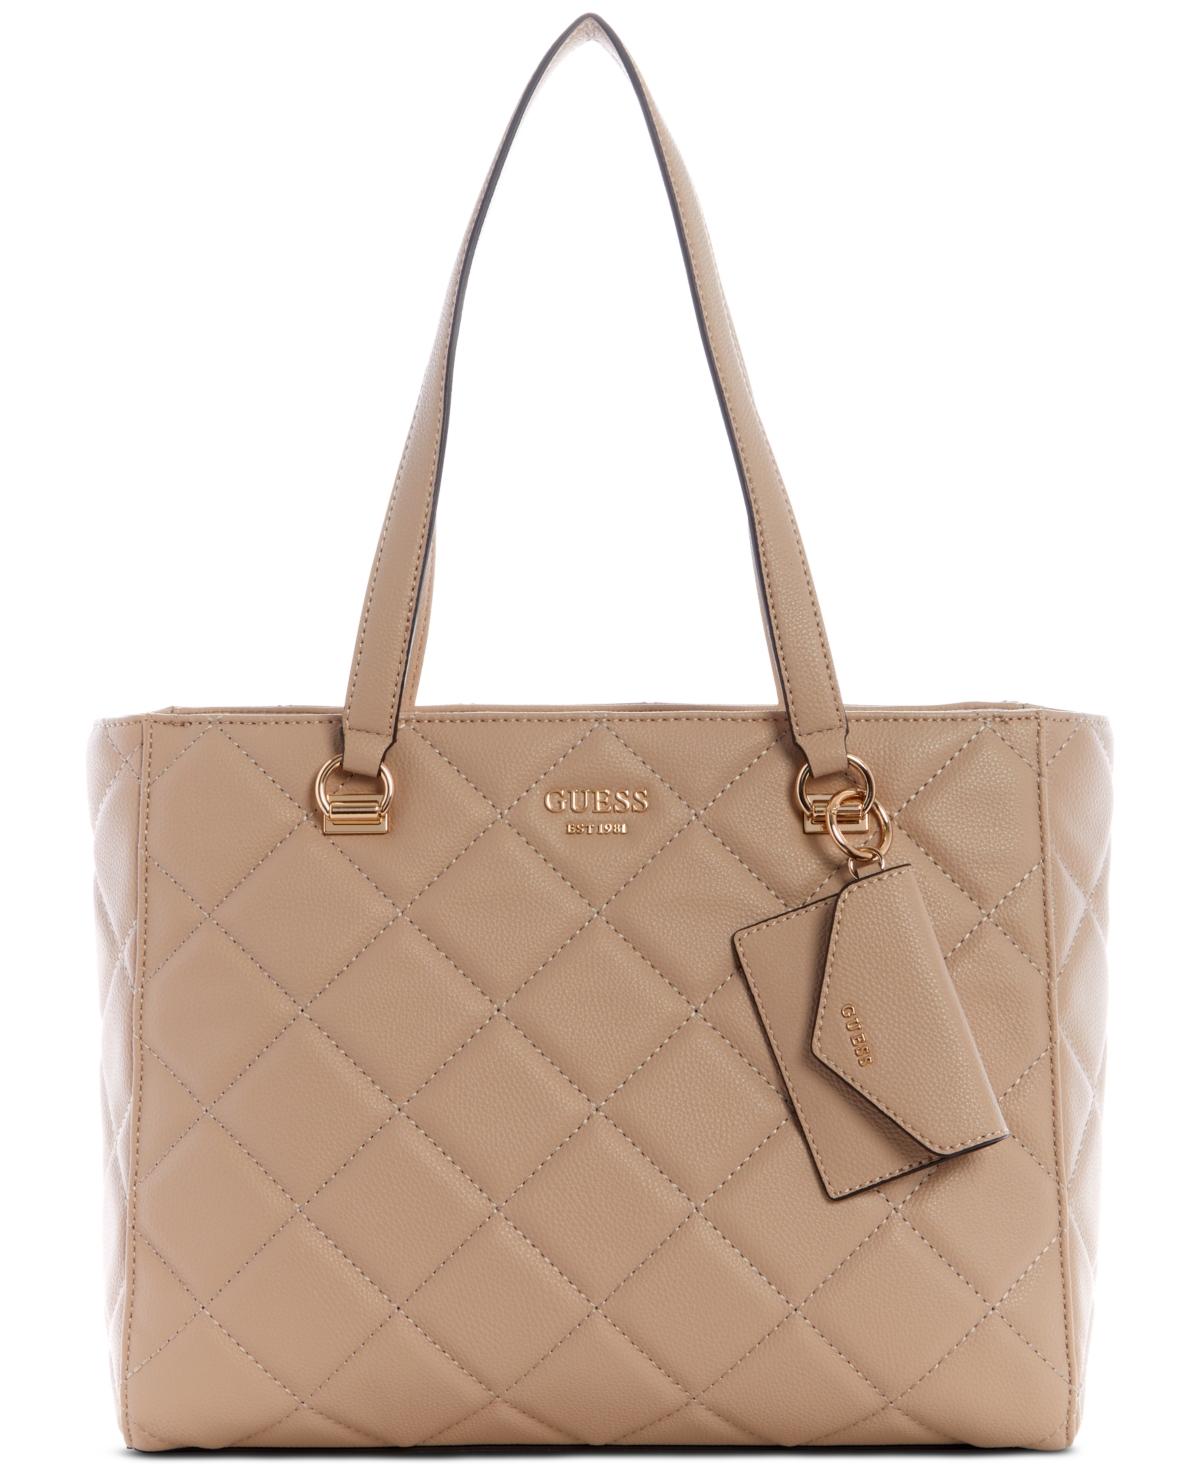 Guess Fantine Tote